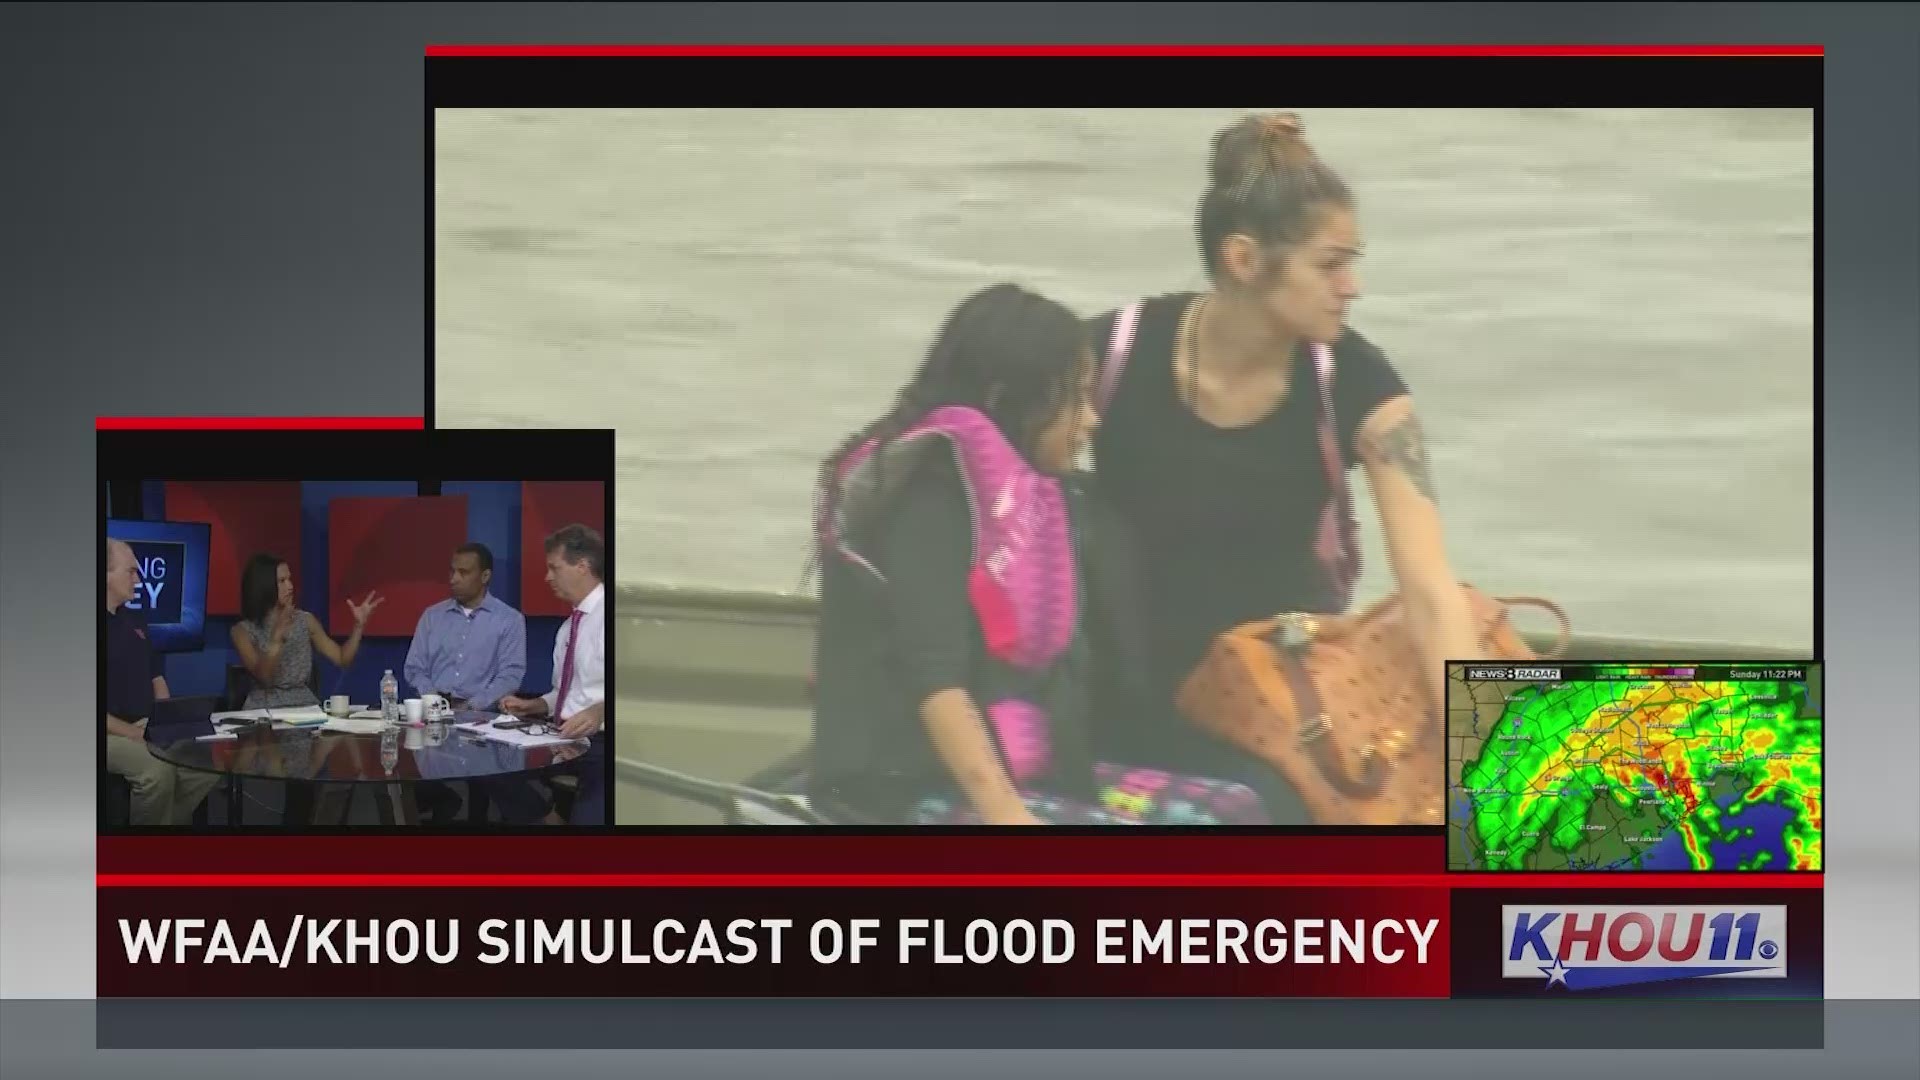 8/27/2017 ' The first three deaths are reported. Rescued families gather at George R. Brown for assistance. KHOU 11 goes back on the air after its studios flooded earlier in the day Sunday.